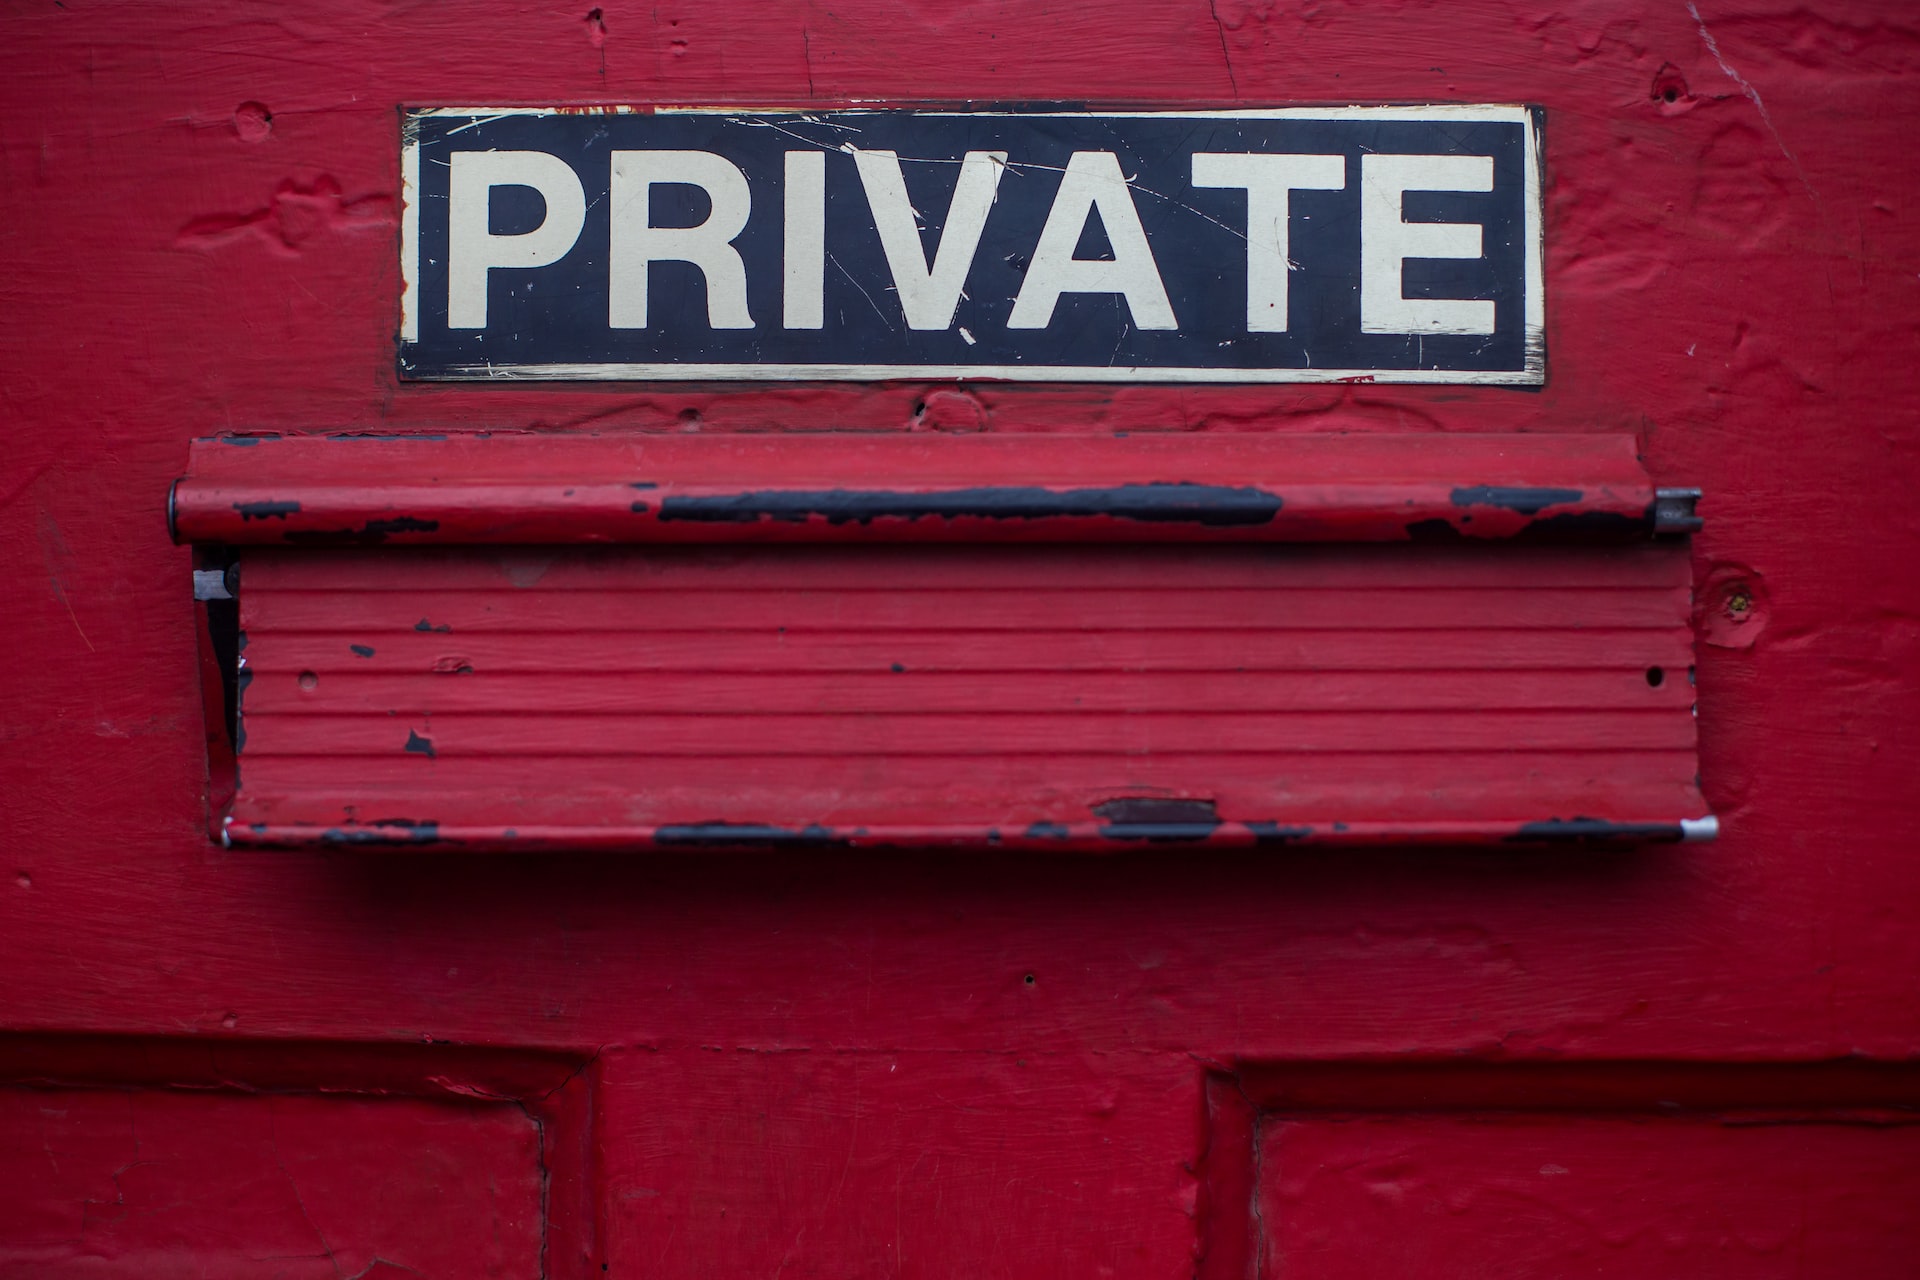 Red letterbox saying "PRIVATE"